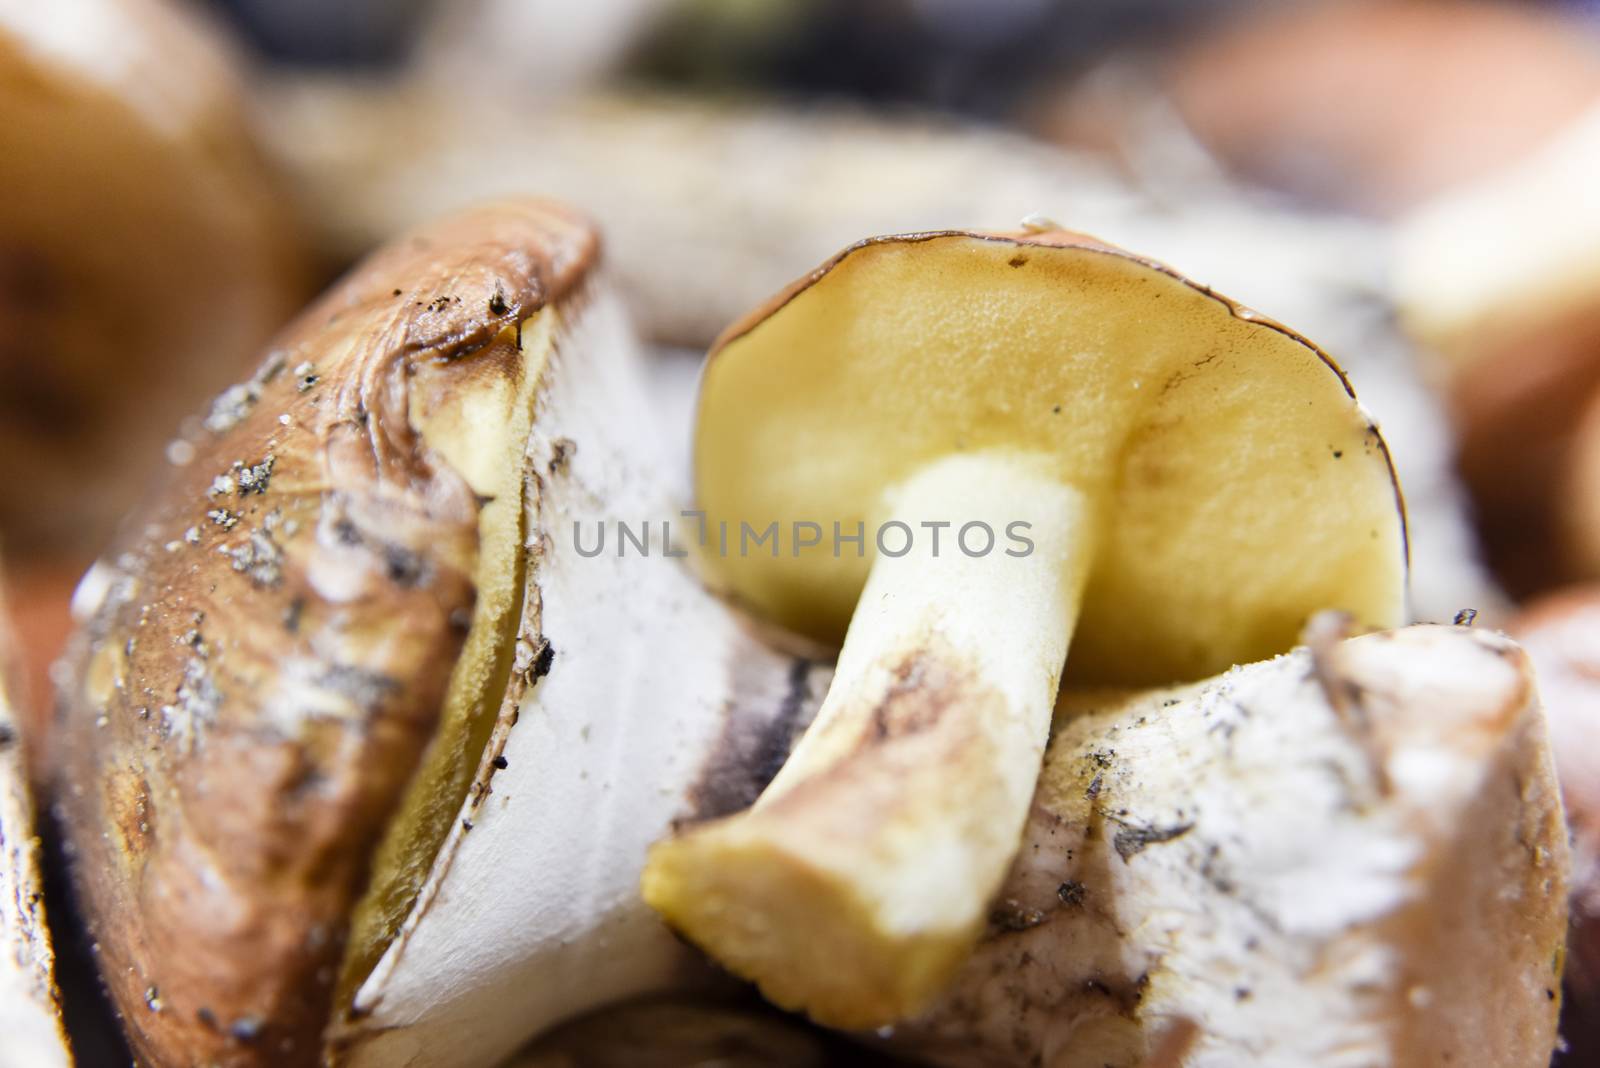 selective focus at the bottom side of the mushroom. Macro fotography, food concepts